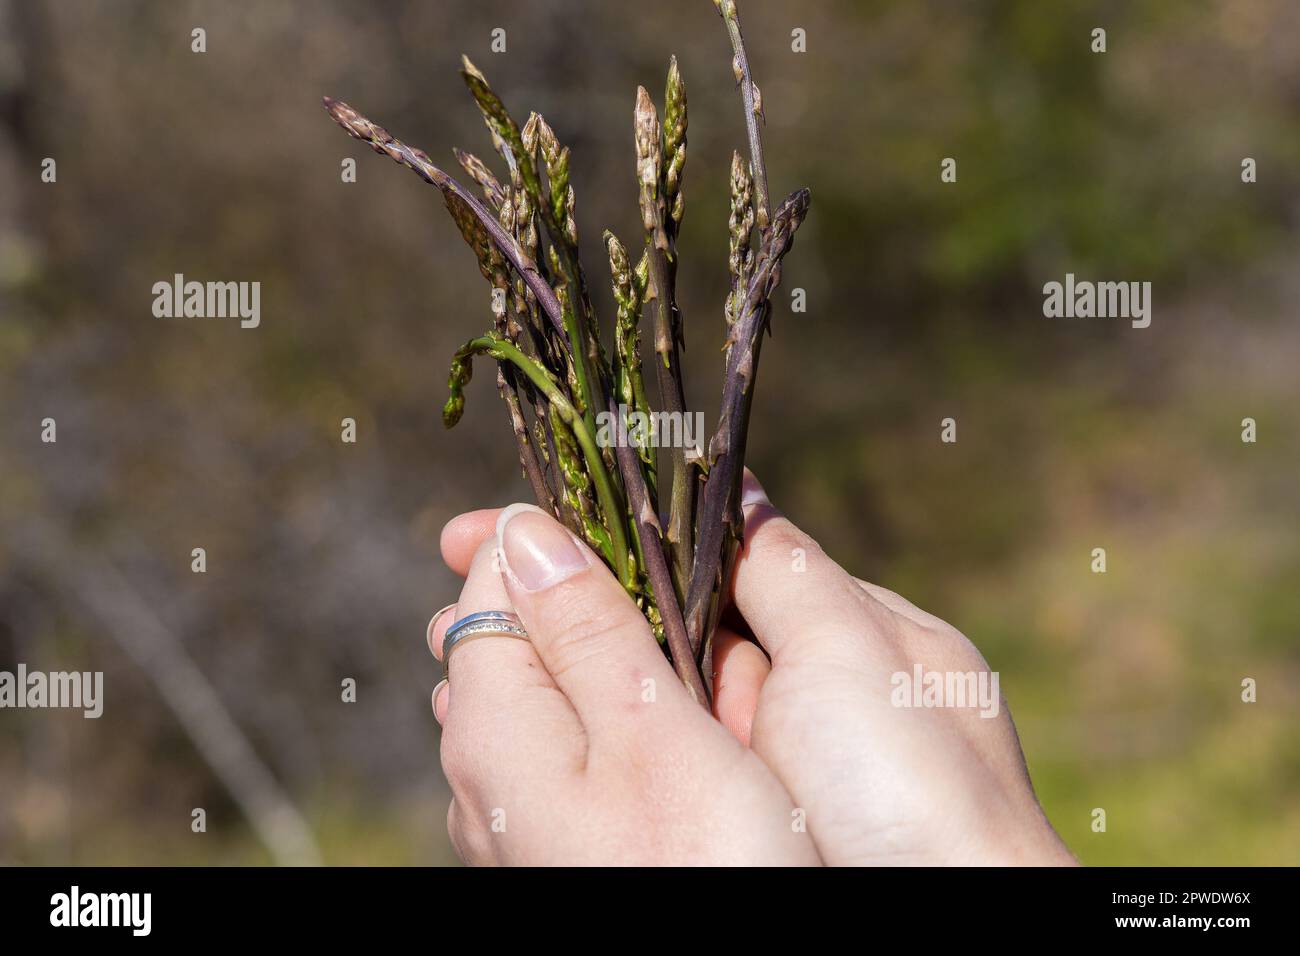 Picking asparagus shoots in Istra, Croatia Stock Photo